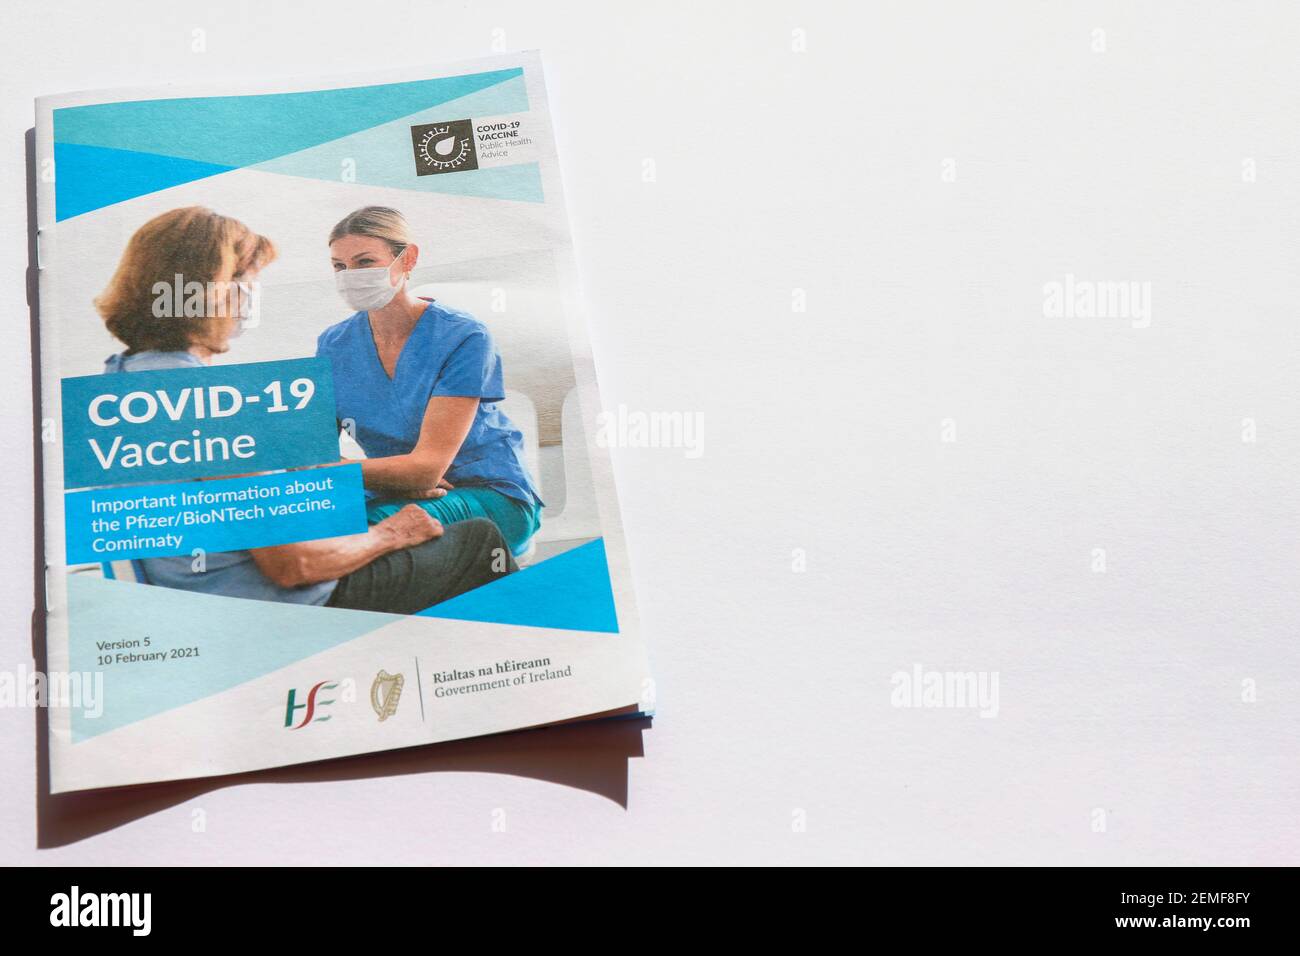 Pfizer BioNTech (Comirnaty) COVID-19 vaccine information booklet. Issued by Government of Ireland Health Service (HSE) during vaccination rollout Stock Photo